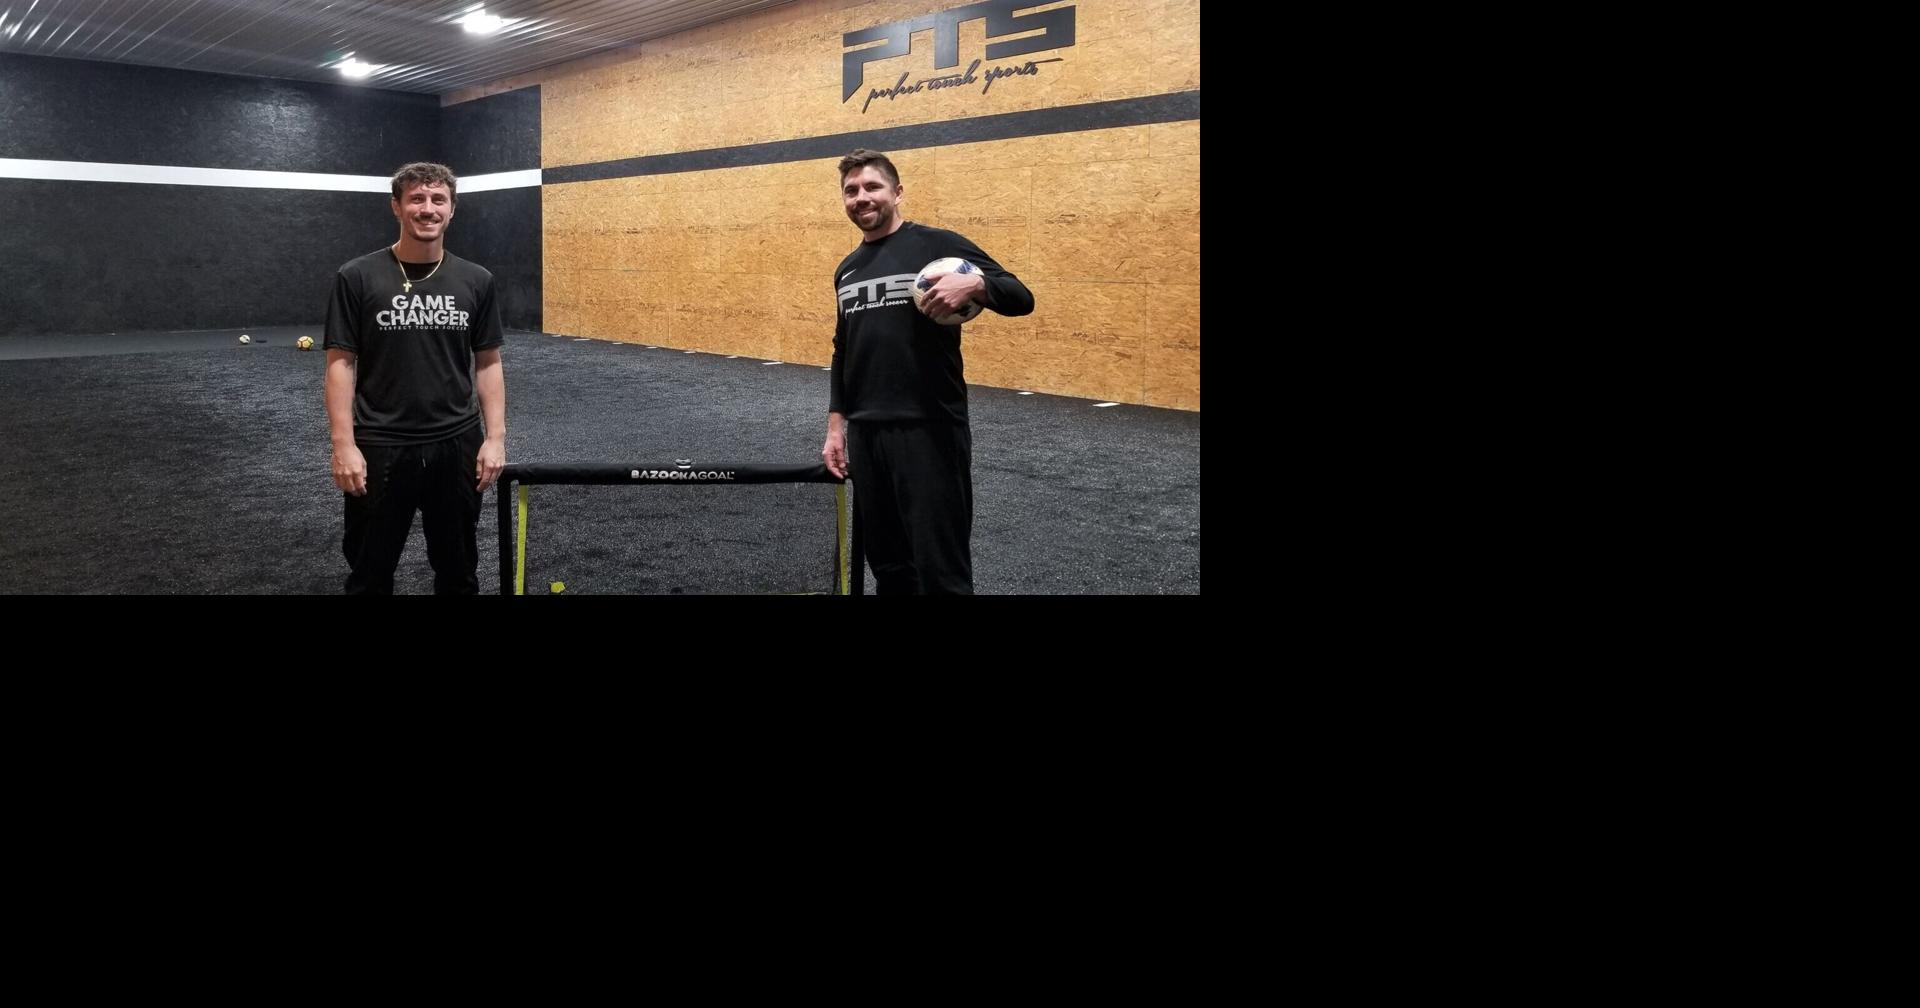 Eat, Sip, Shop: Former professional soccer player opening fitness and sports training facility in Coopersburg | Eat, Sip, Shop